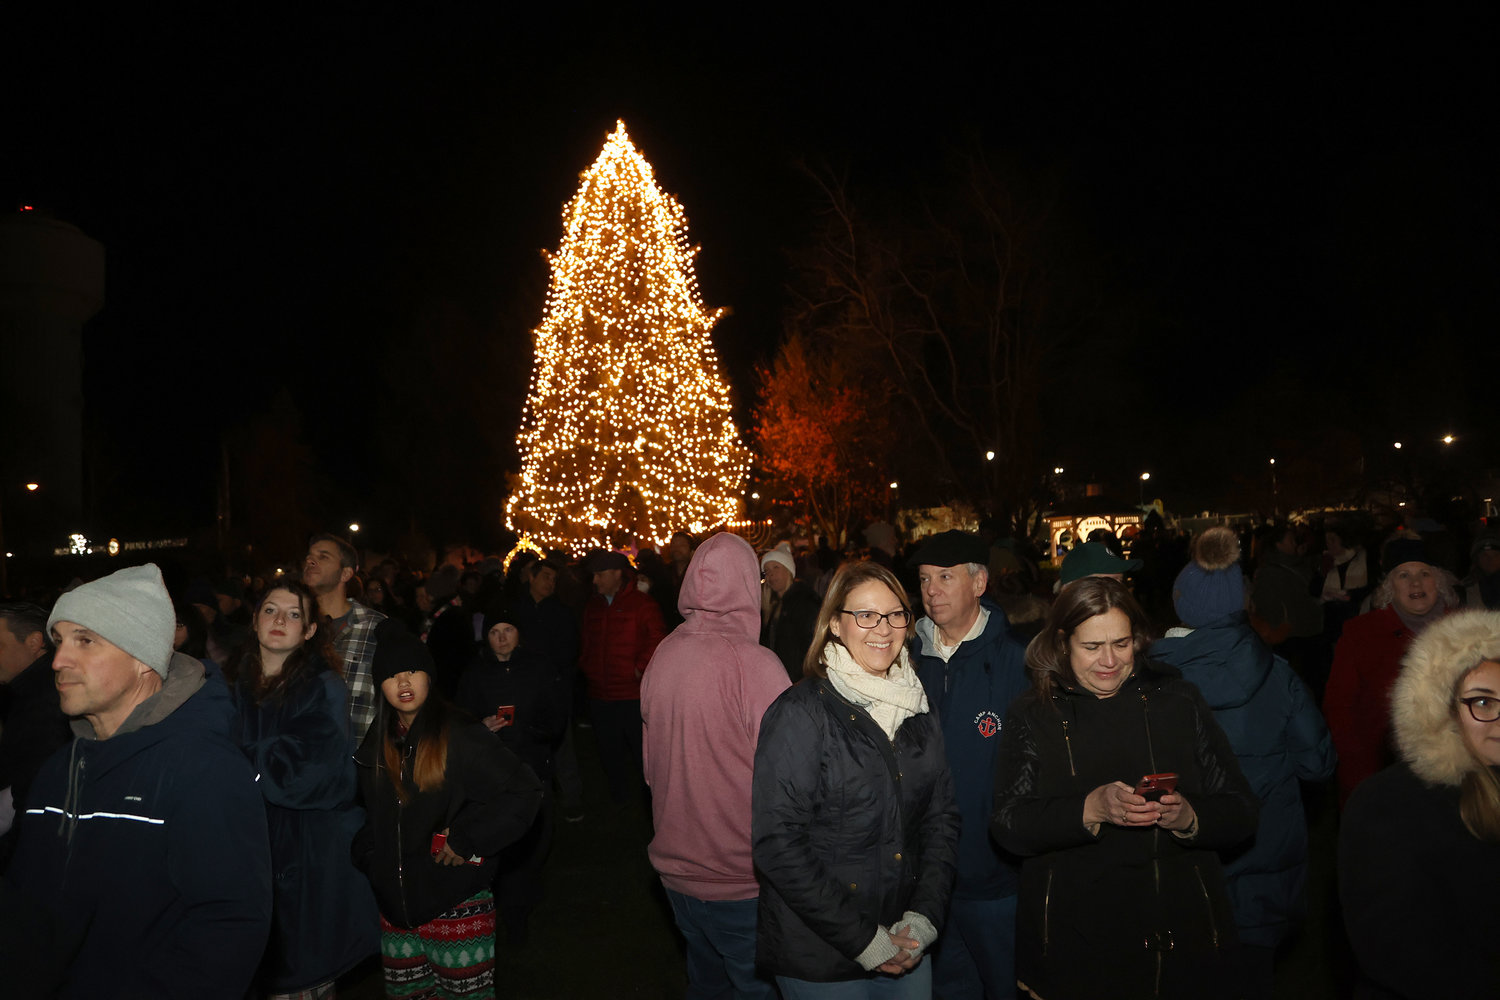 Hundreds gathered along the Village Green in Rockville Centre for the annual tree lighting ceremony on Dec. 1.